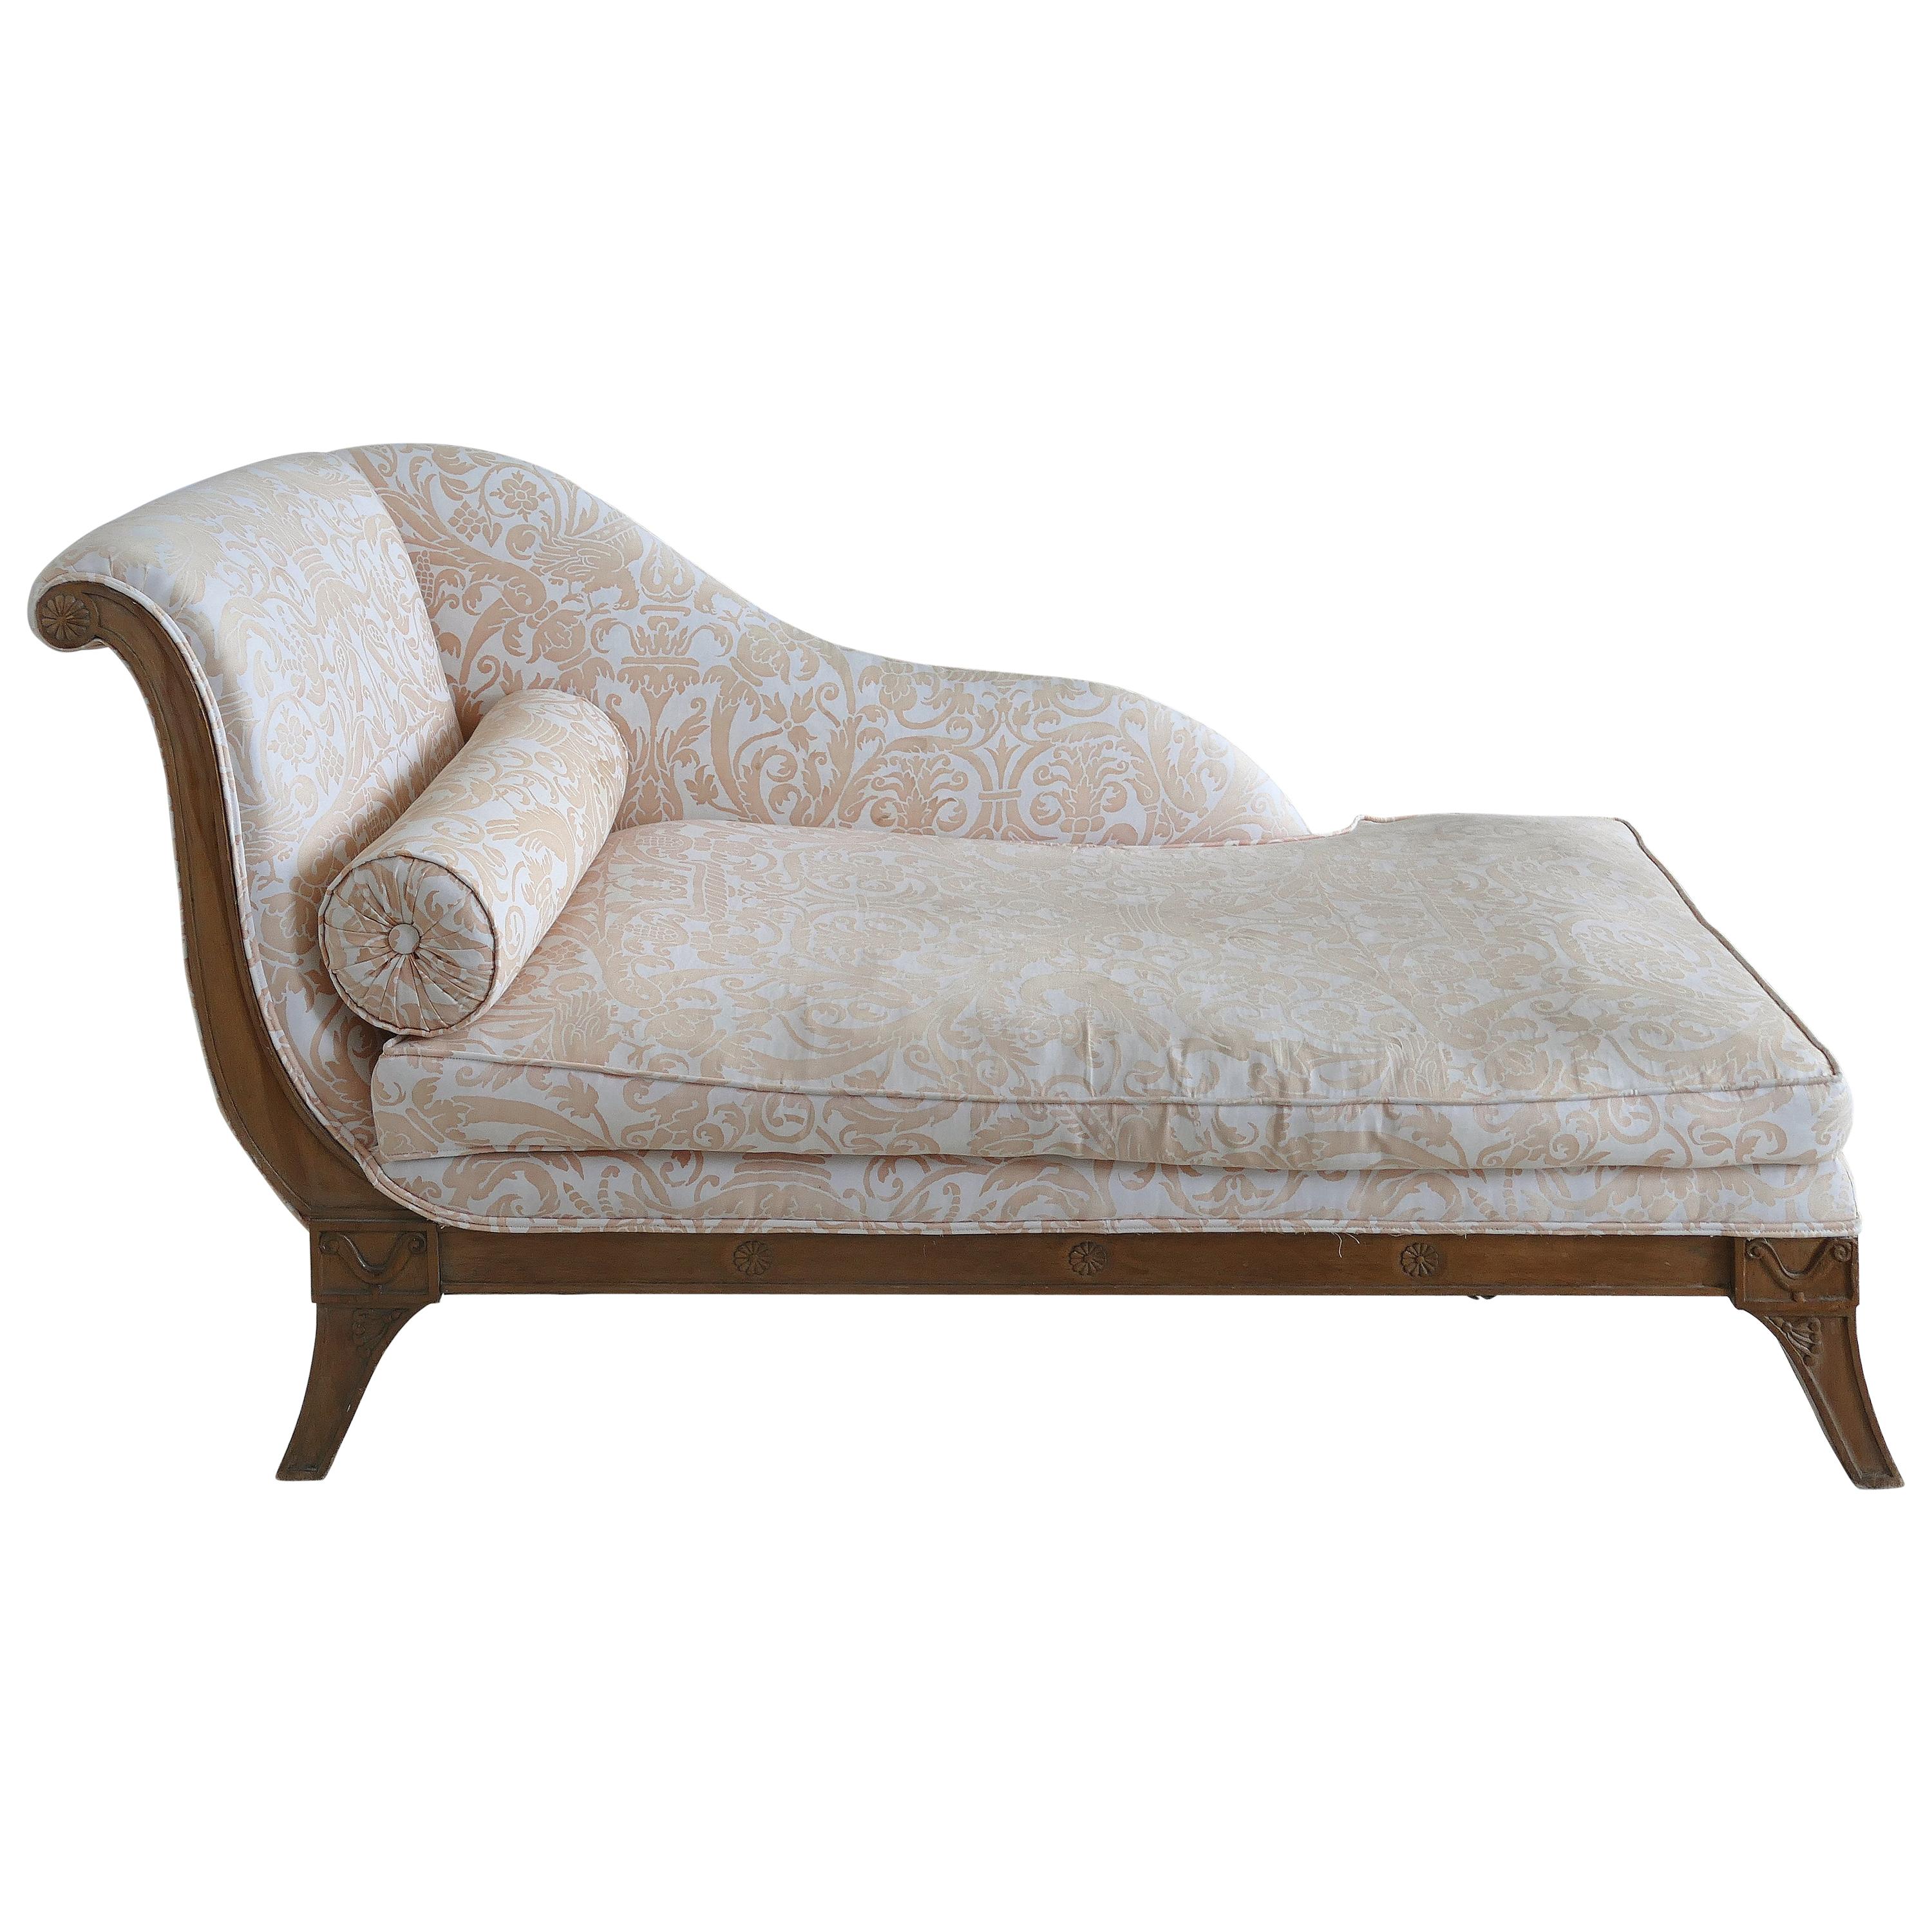 Antique Chaise Lounge Upholstered in Fortuny Fabric with a Carved Wood Frame